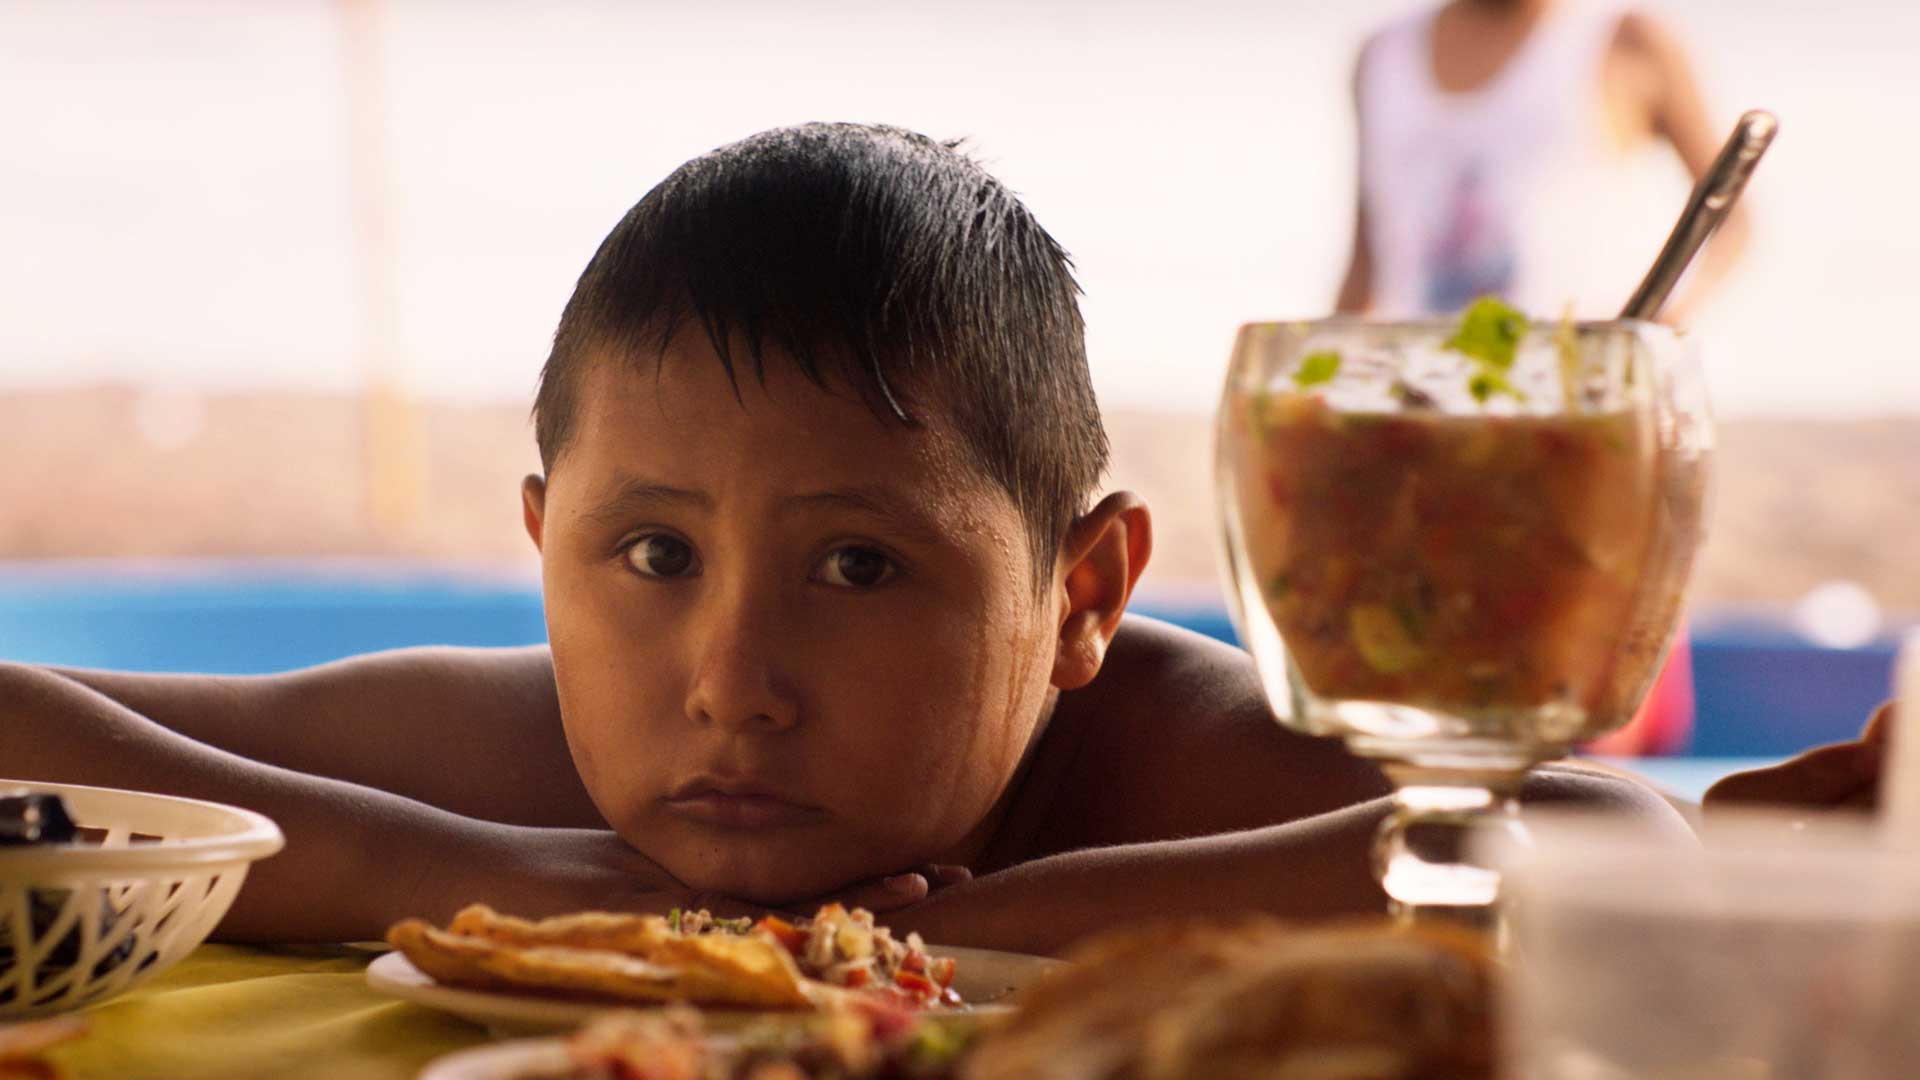 Young Sansón as played by young cousin Tonito, looking sadly across a table in Mexico